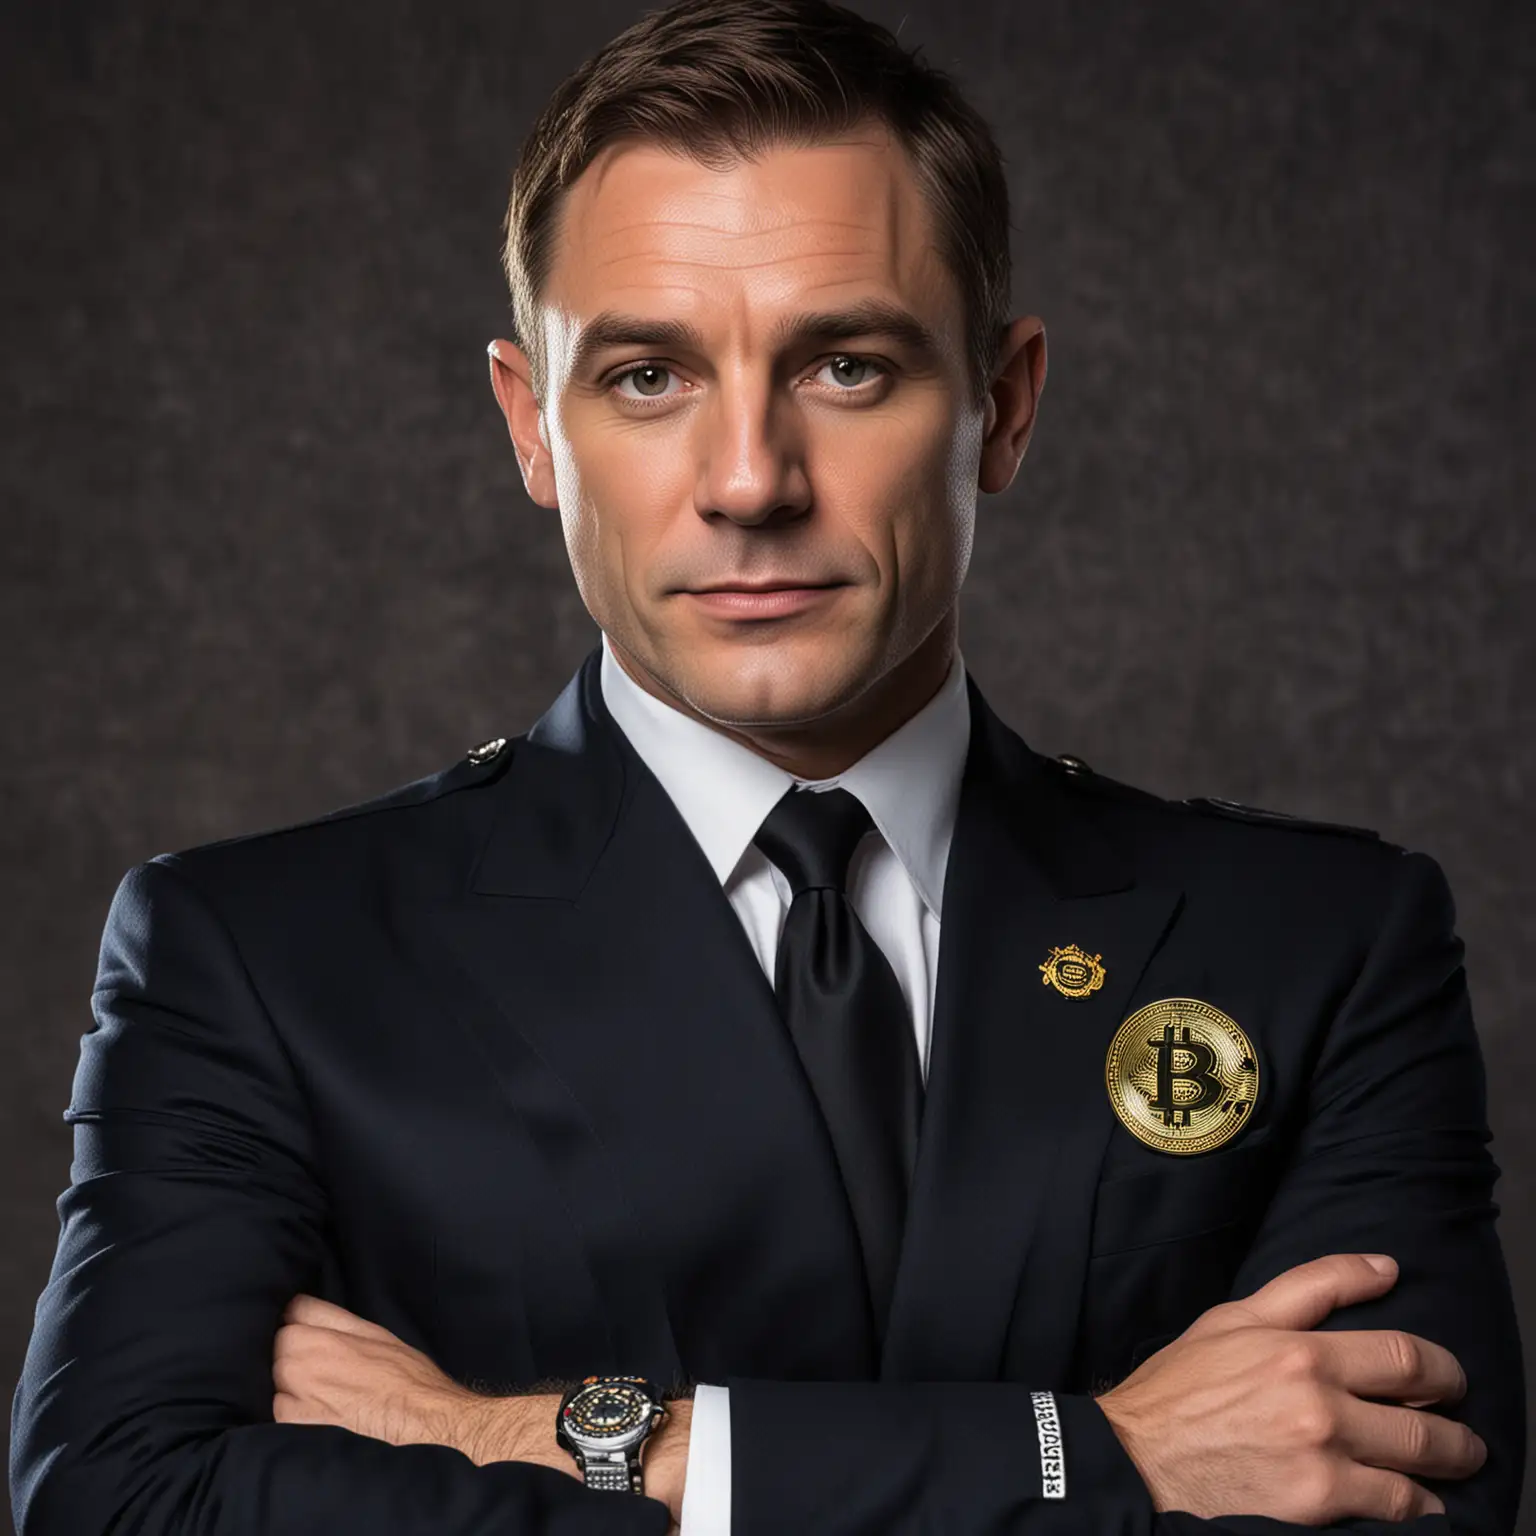 a person called Bitcoin Bond, just like James Bond 007, with a police-looking theme to it.